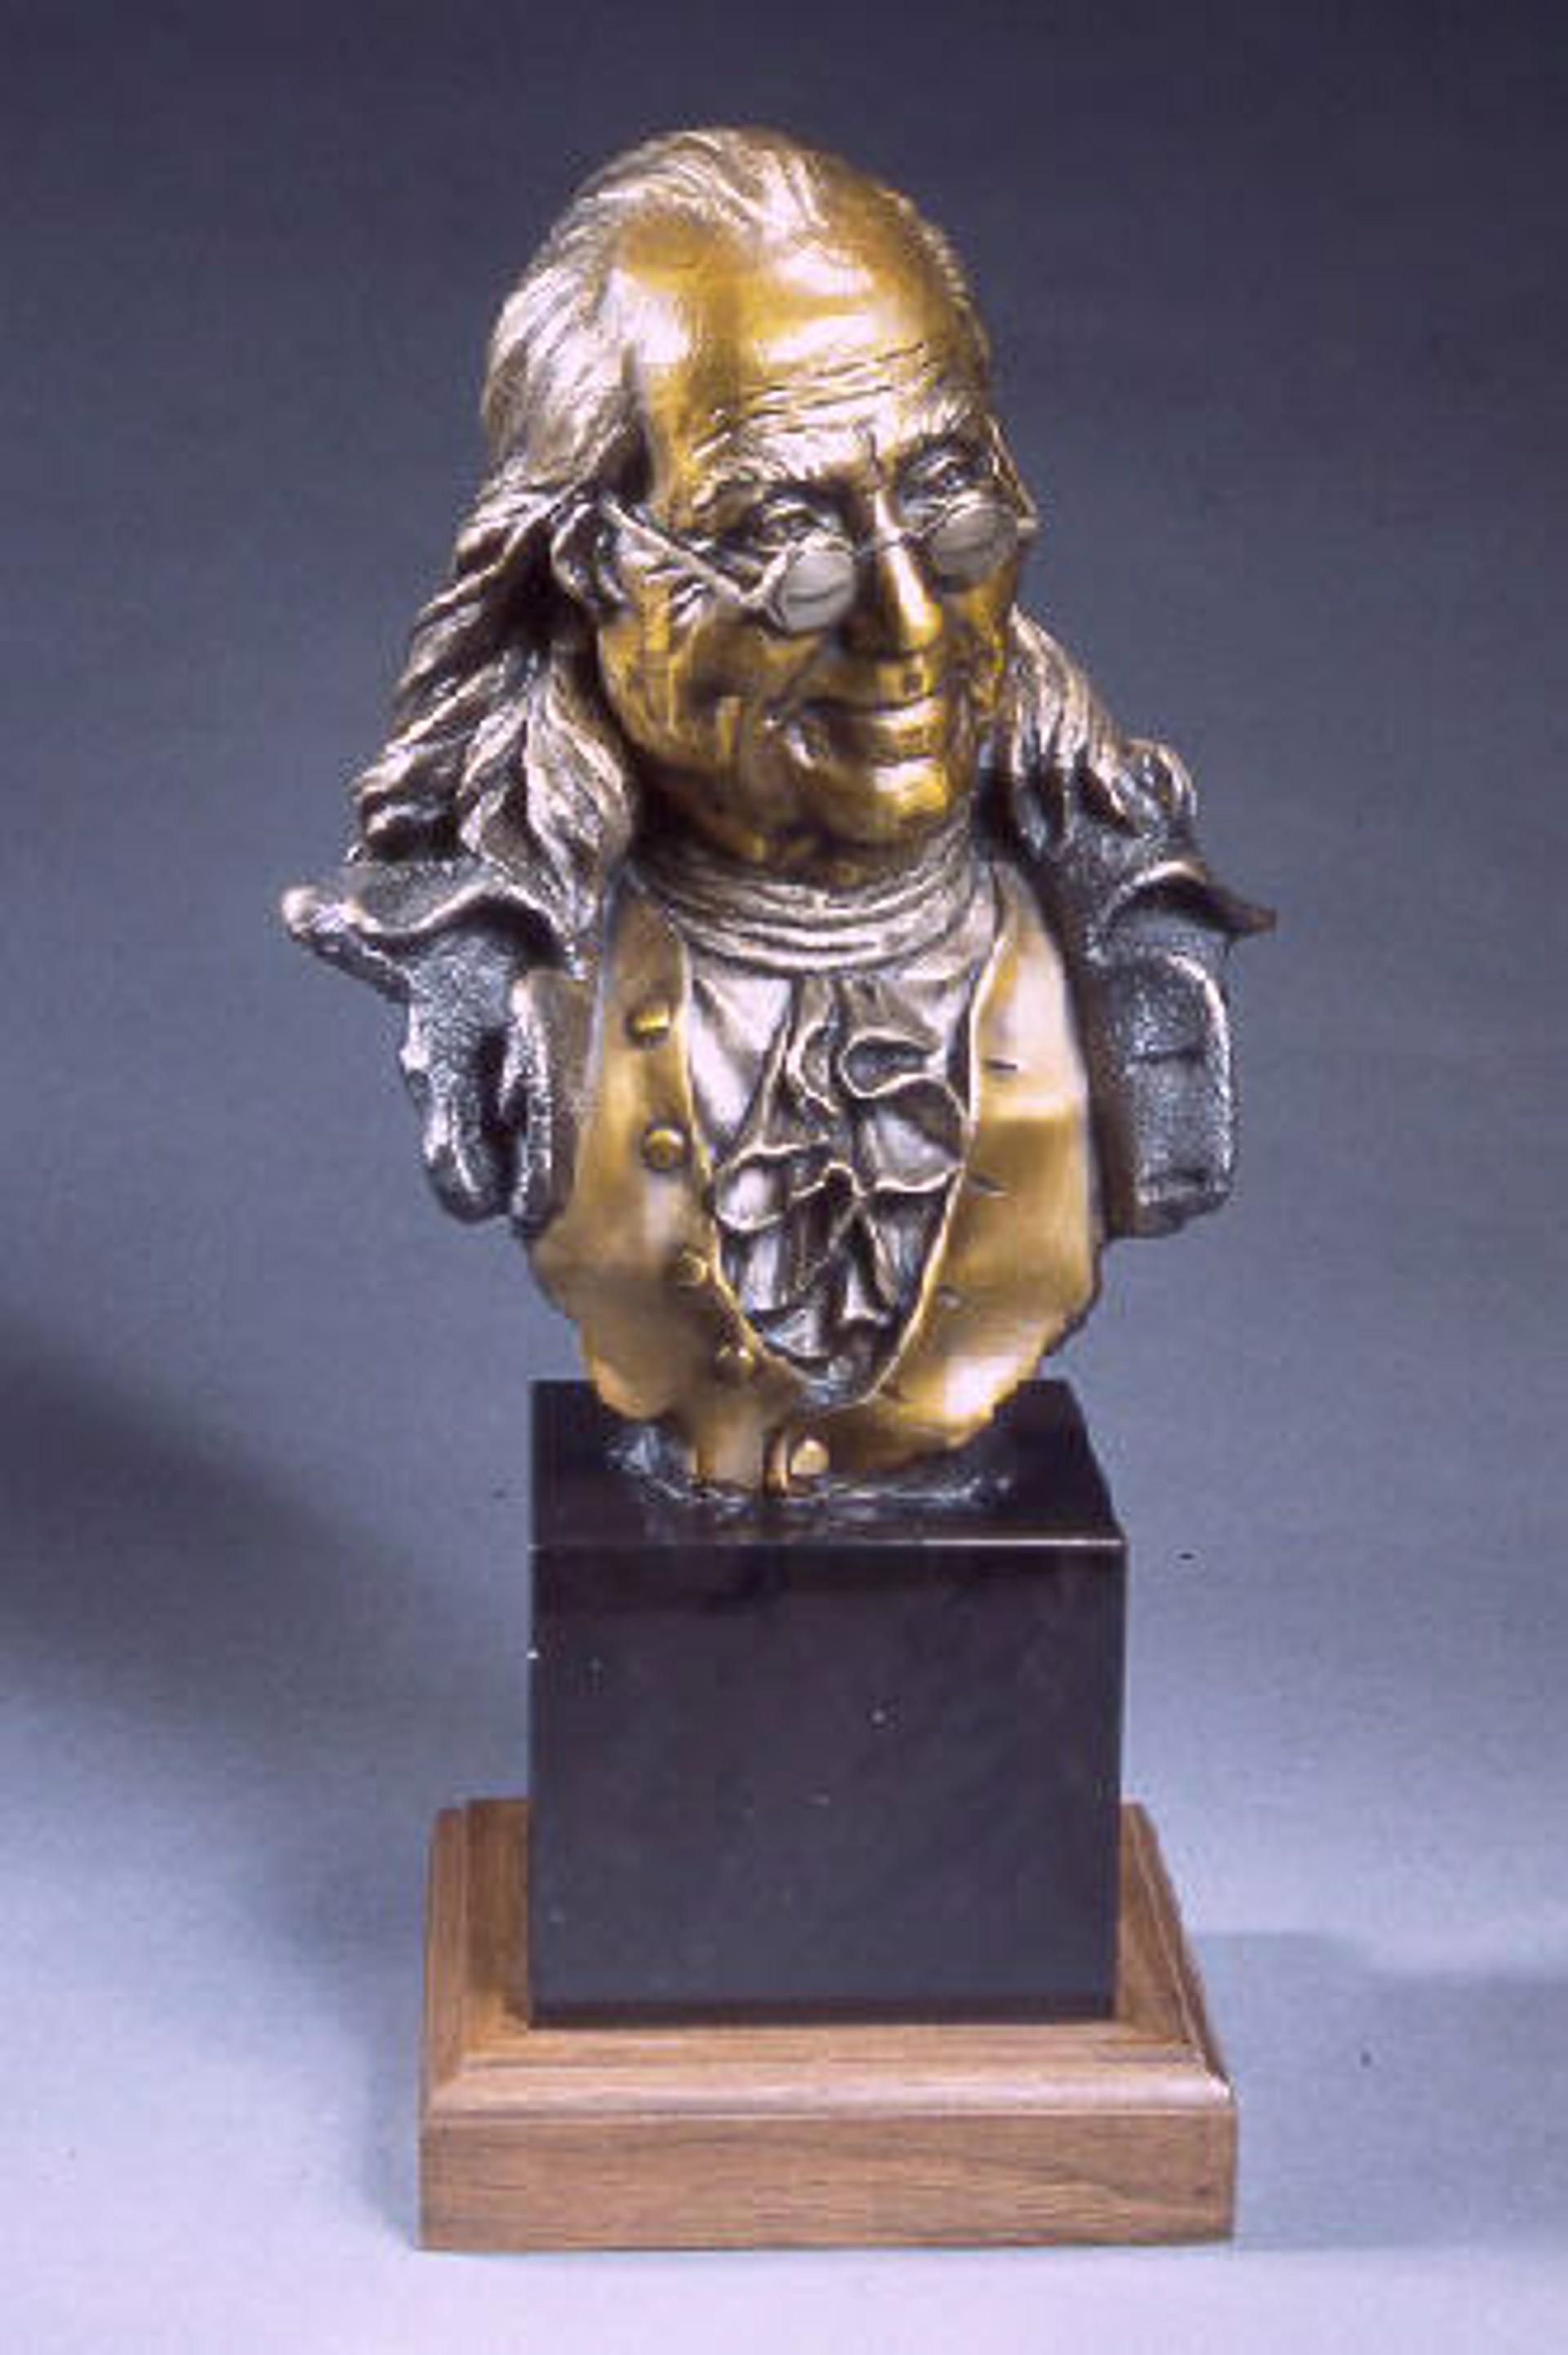 Ben Franklin Bust by George Lundeen